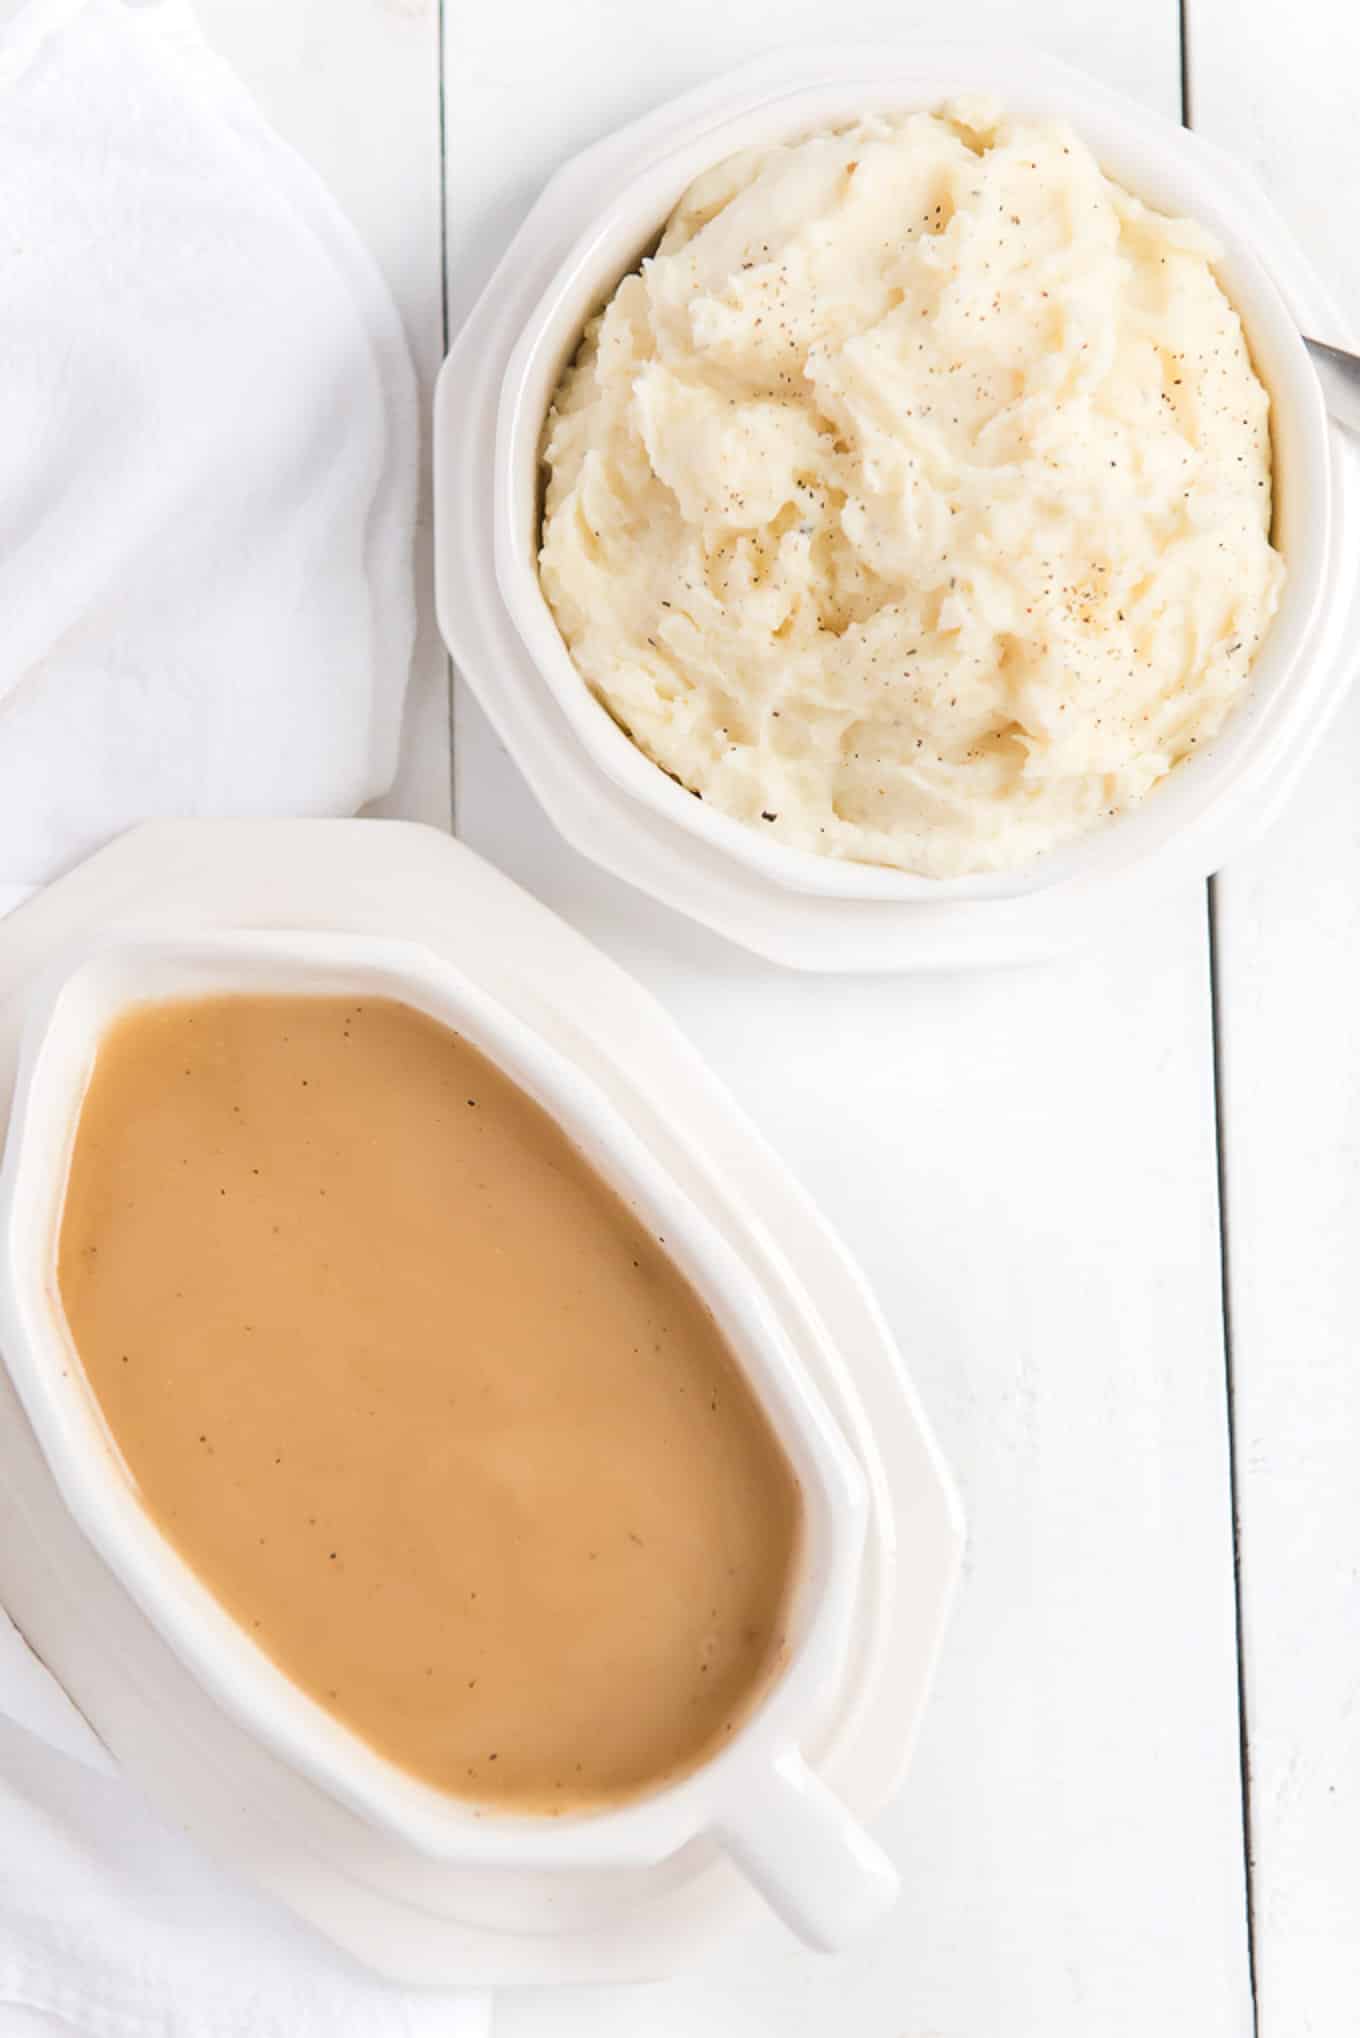 Gravy without drippings in a white serving dish on the table with a bowl of mashed potatoes next to it.